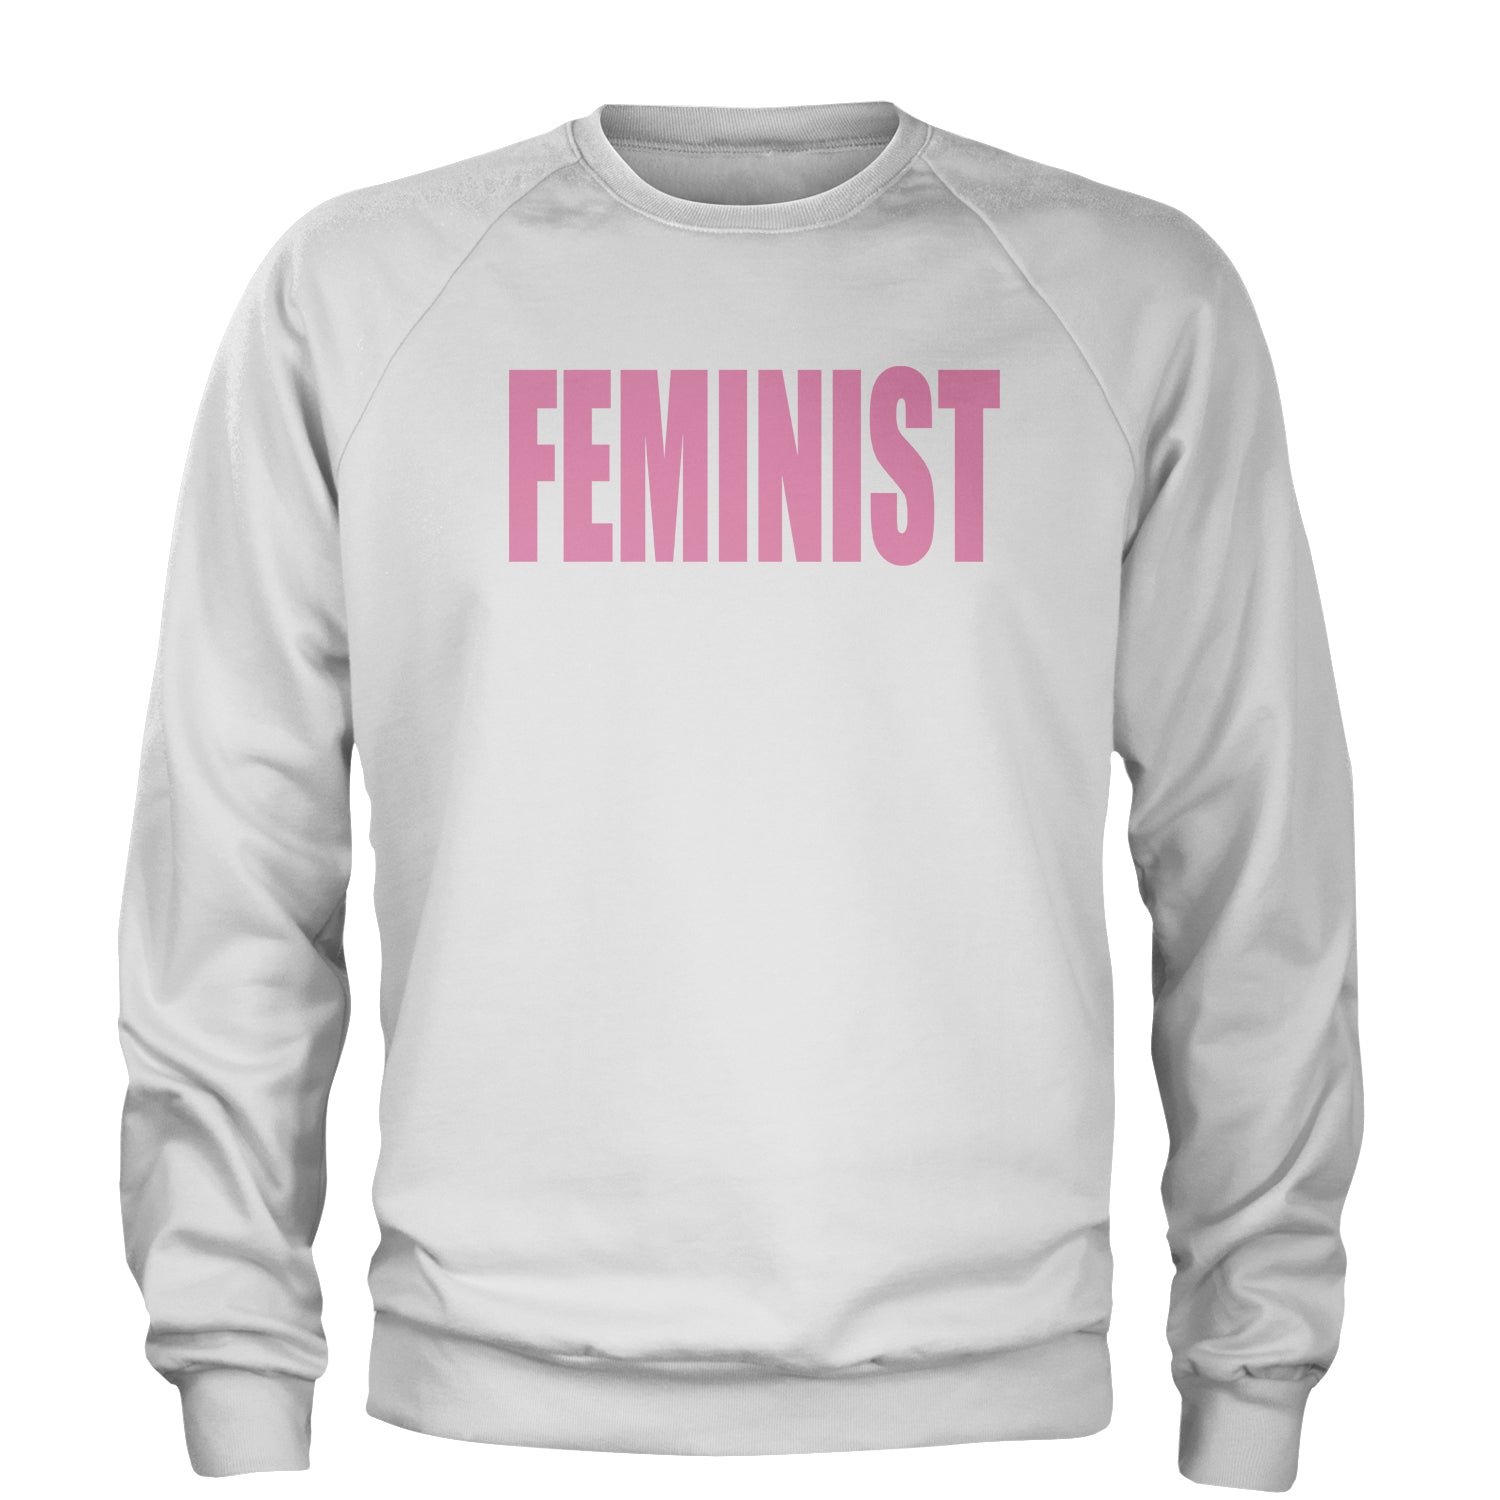 Feminist (Pink Print) Adult Crewneck Sweatshirt a, equal, equality, feminism, feminist, gender, is, lgbtq, like, looks, nevertheless, pay, persisted, rights, she, this, what by Expression Tees